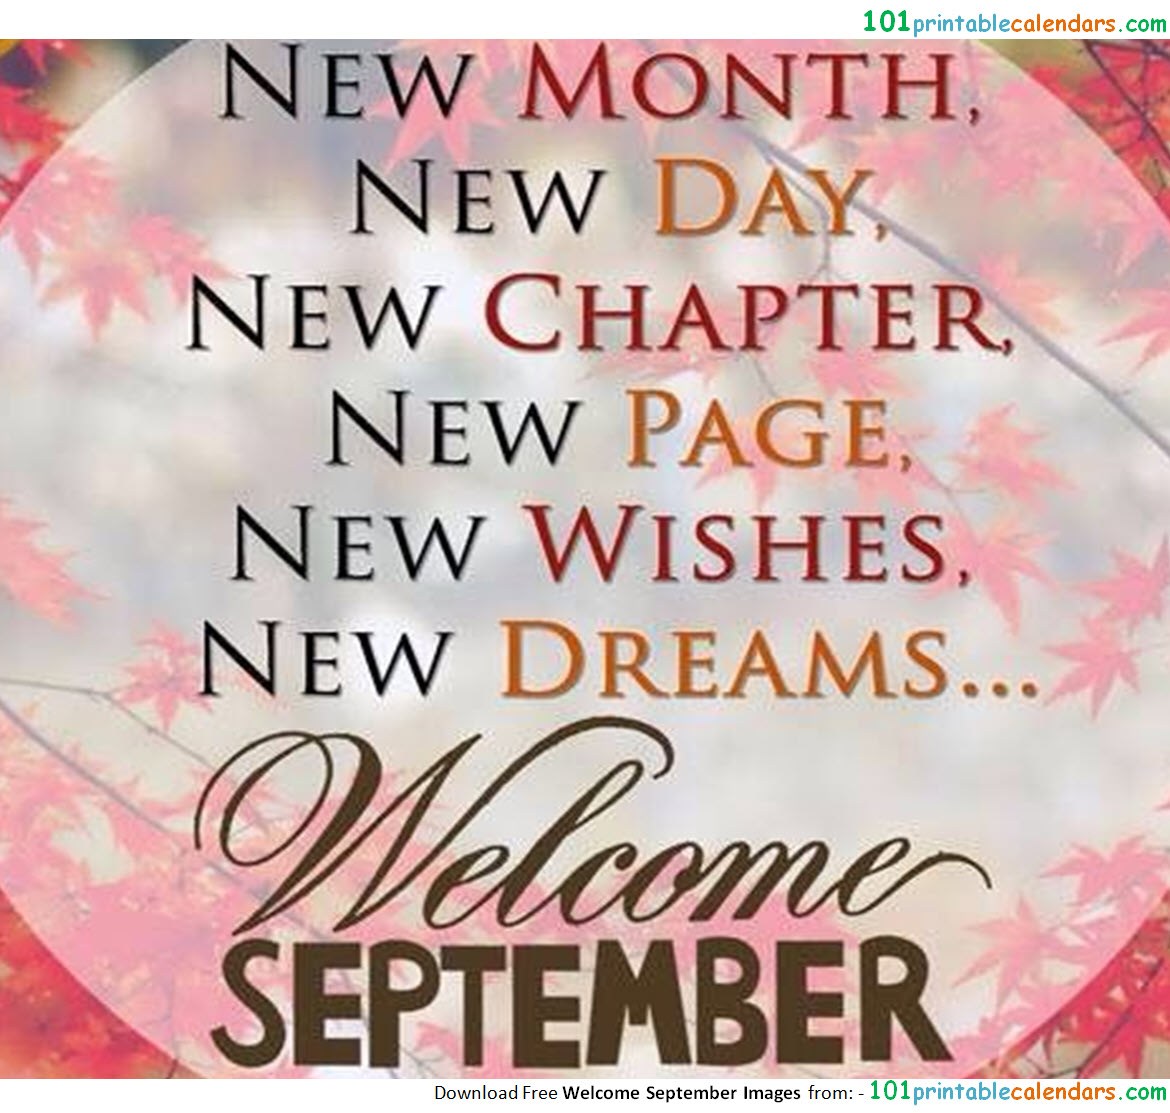 Welcome September Images and Quotes